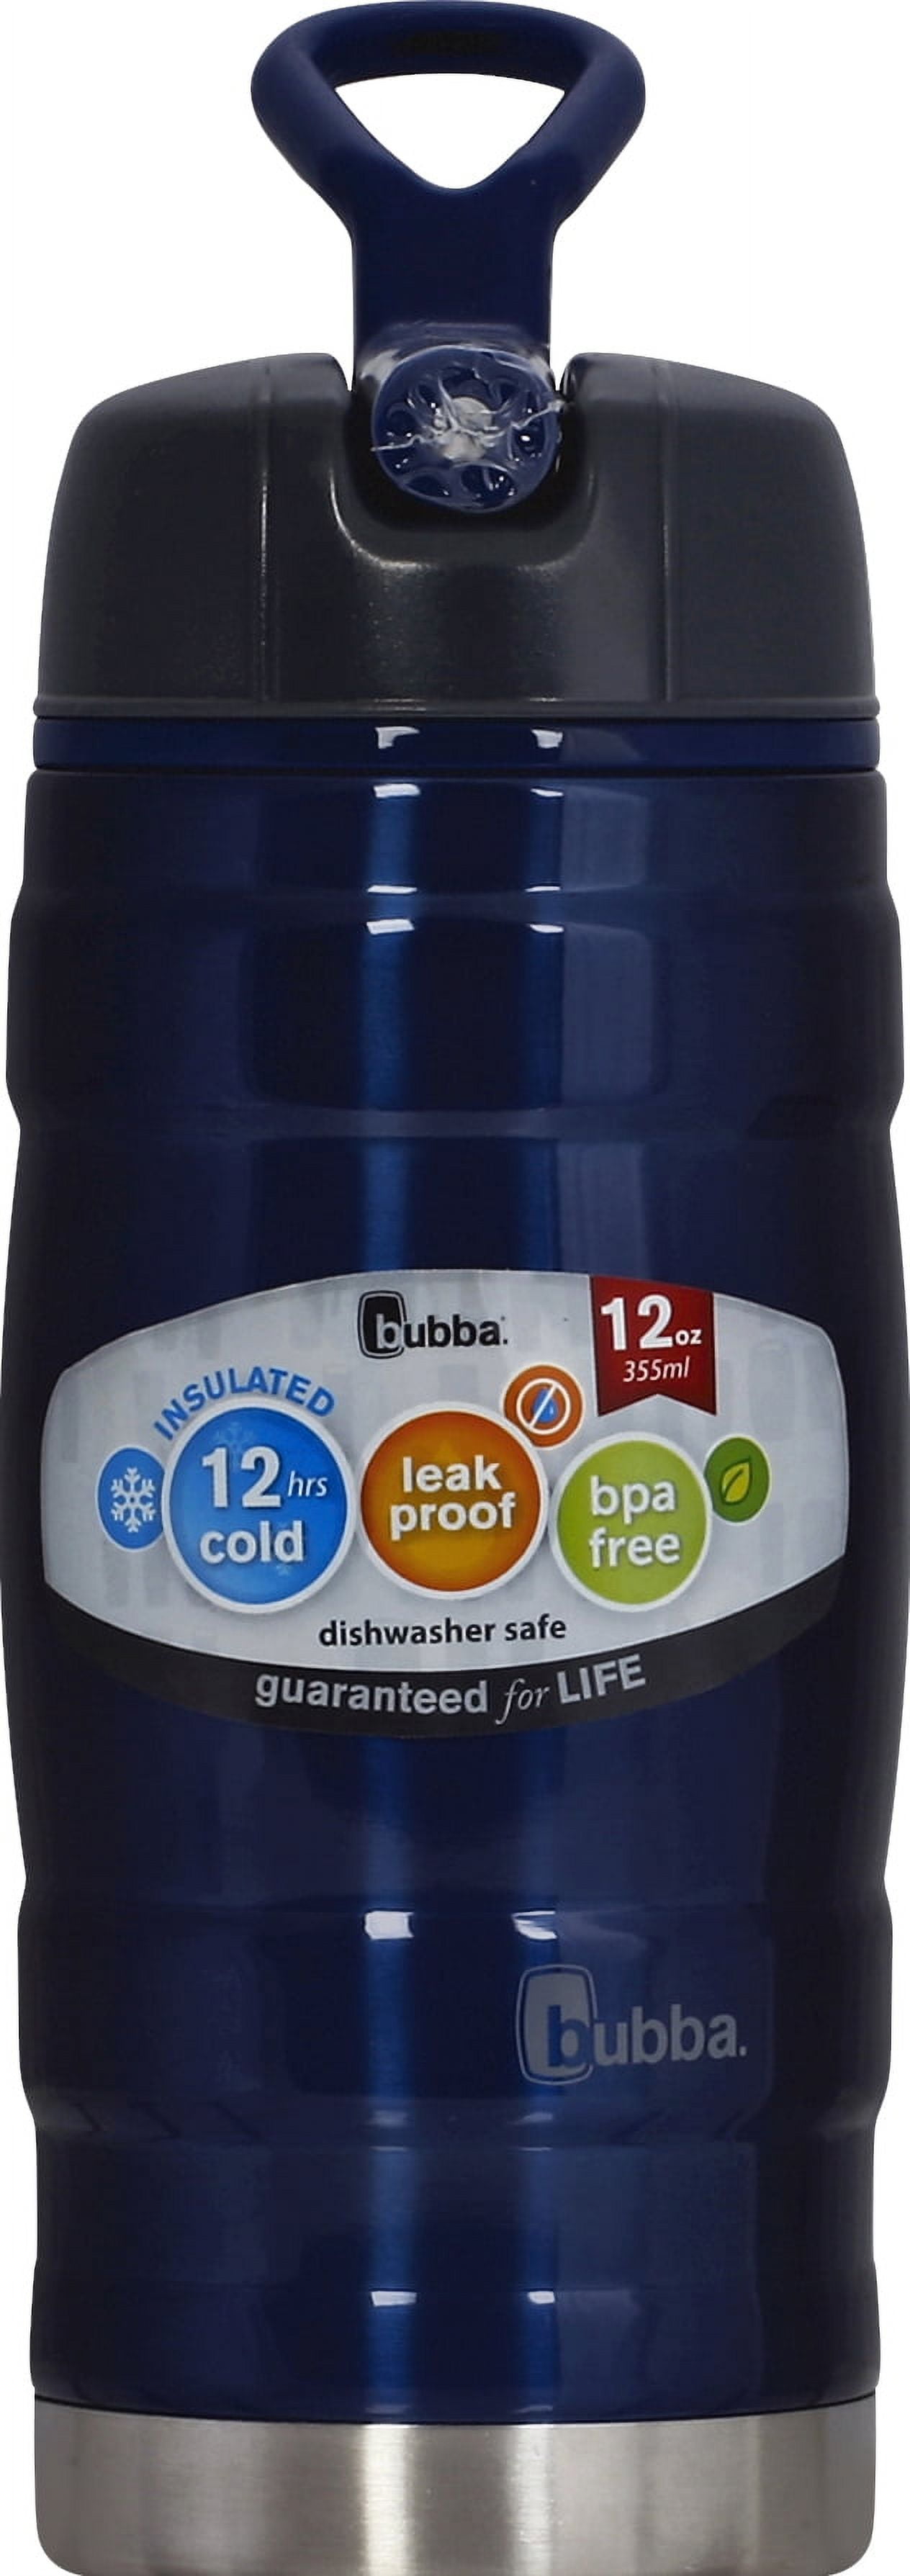  bubba Hero Sport Kids Insulated Stainless Steel Water Bottle  with Flip-Up Straw, 12 oz., Blue : Sports & Outdoors